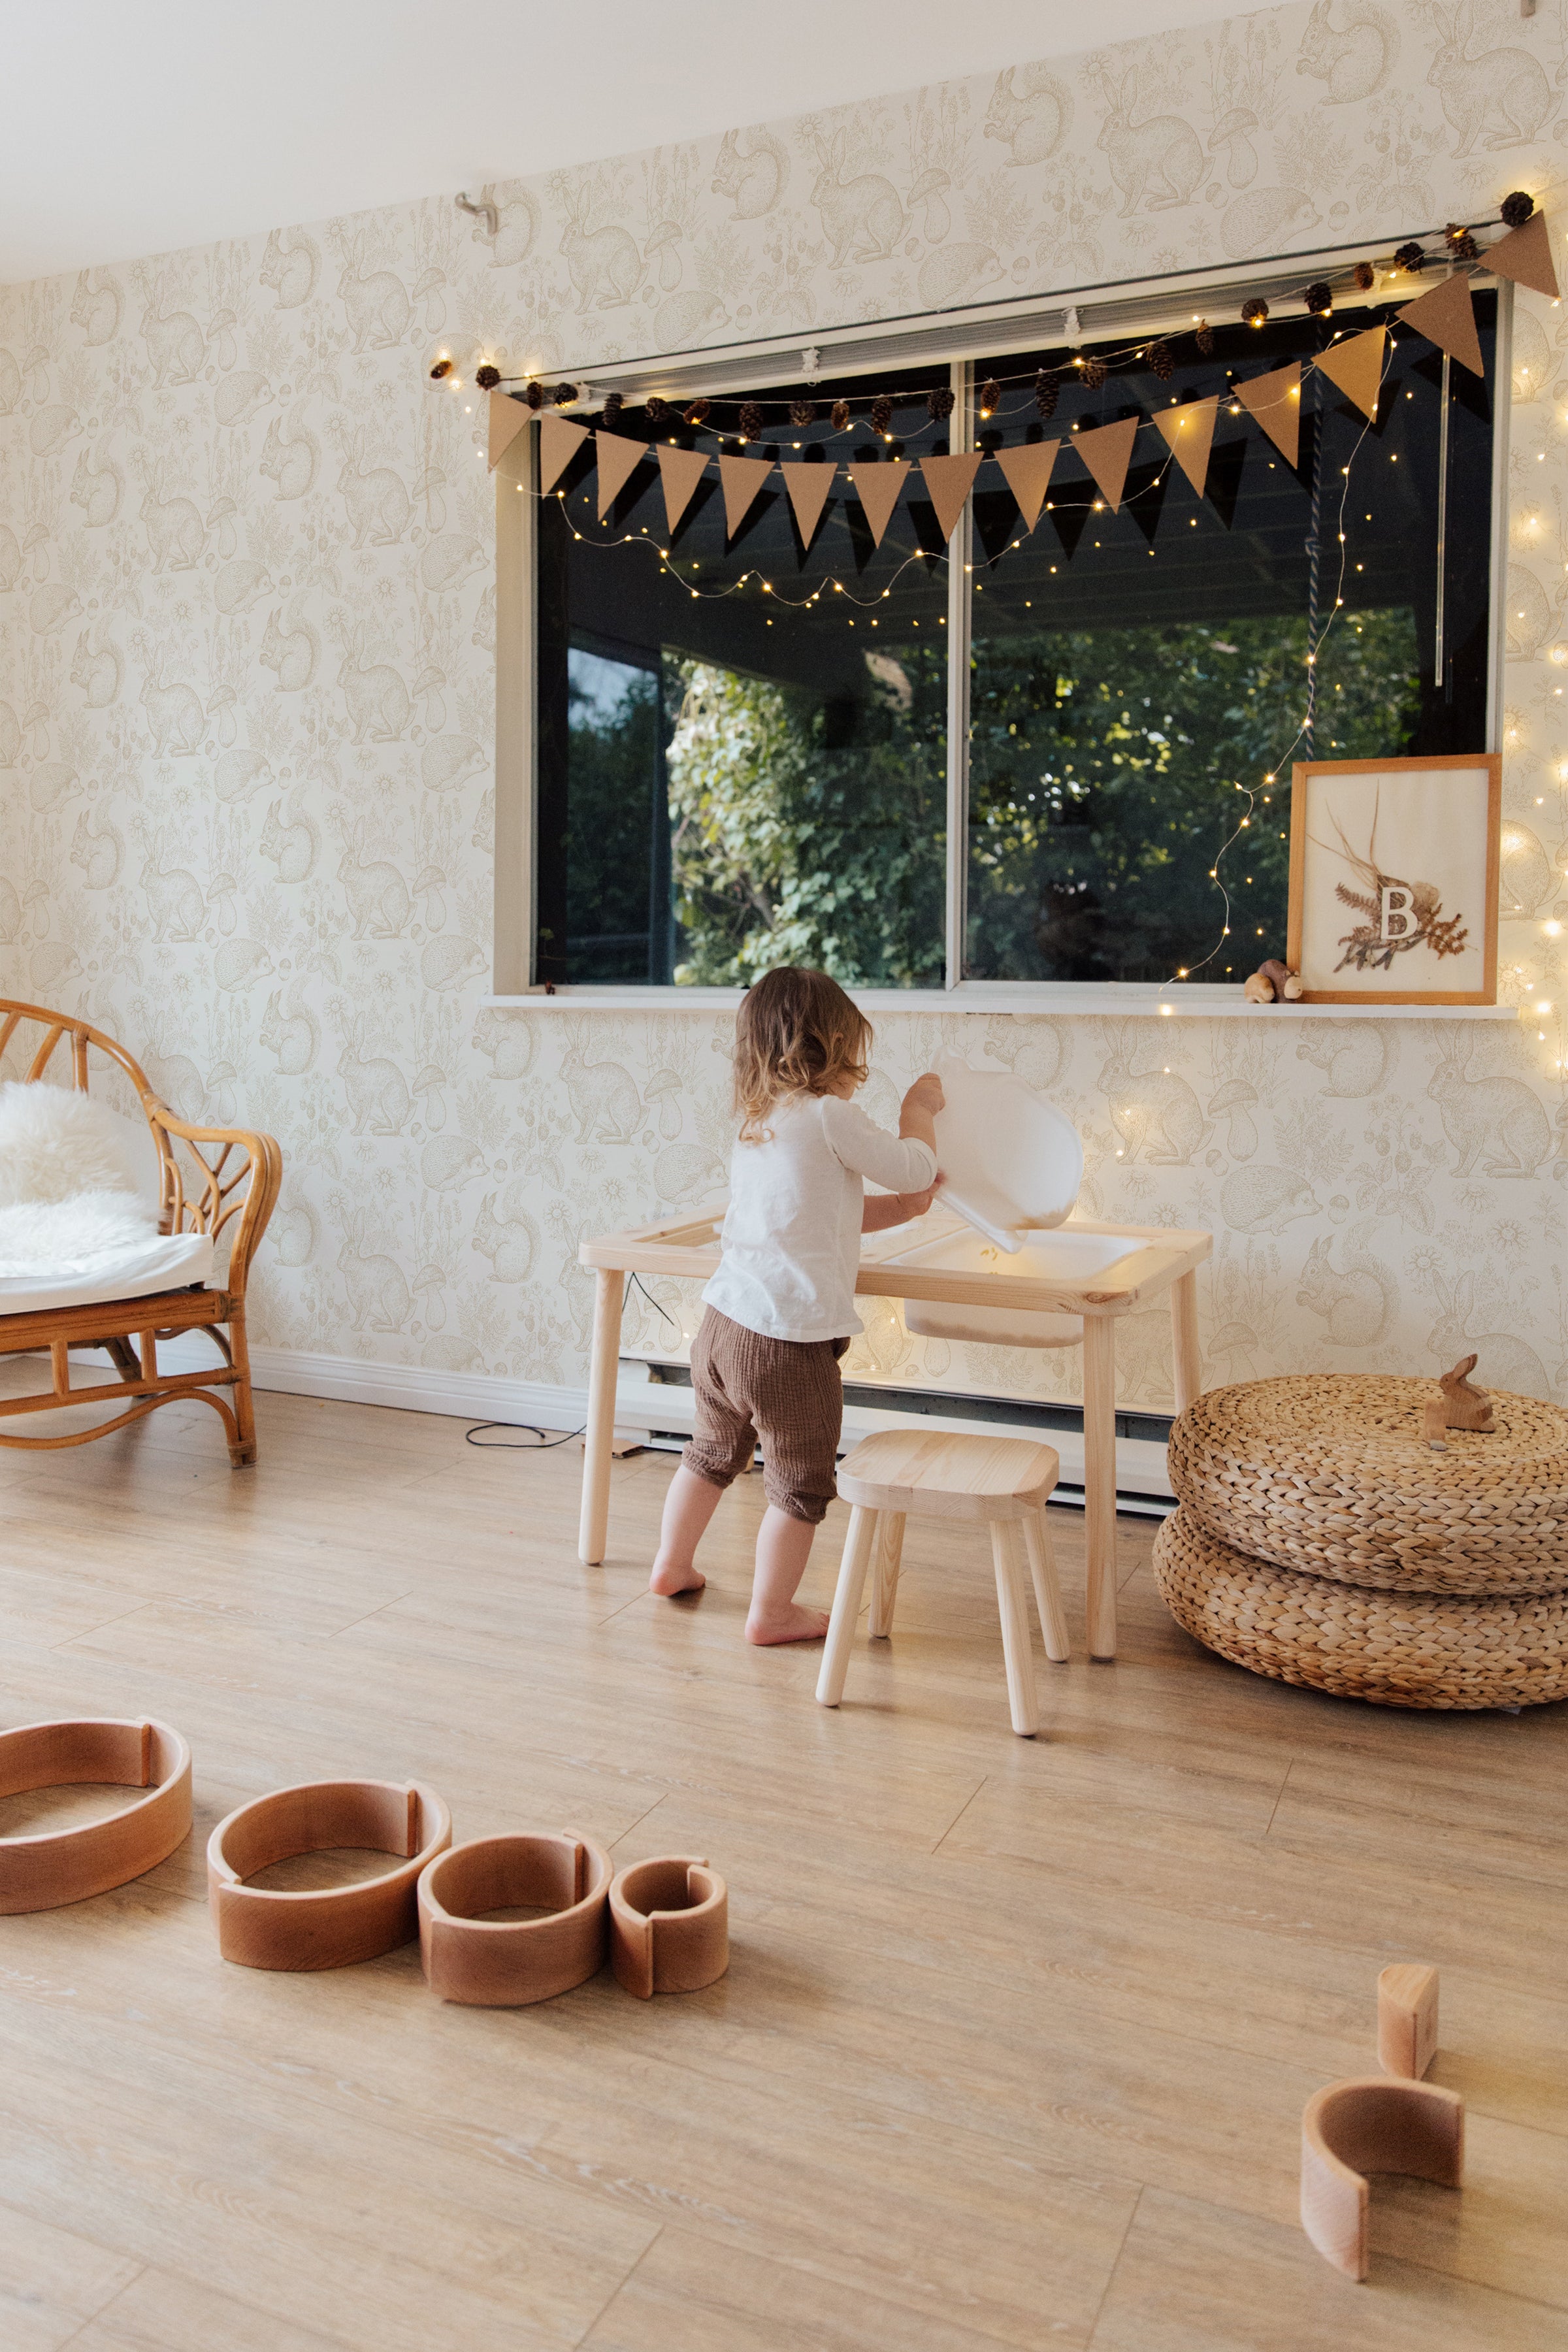 A child's play area against a backdrop of "Woodland Creatures Wallpaper" with playful sketches of rabbits and squirrels. The room features a small wooden table and stools, with a child in a white top and brown pants standing at the window, which is framed with soft drapes and whimsical string lights, creating a magical and kid-friendly environment.